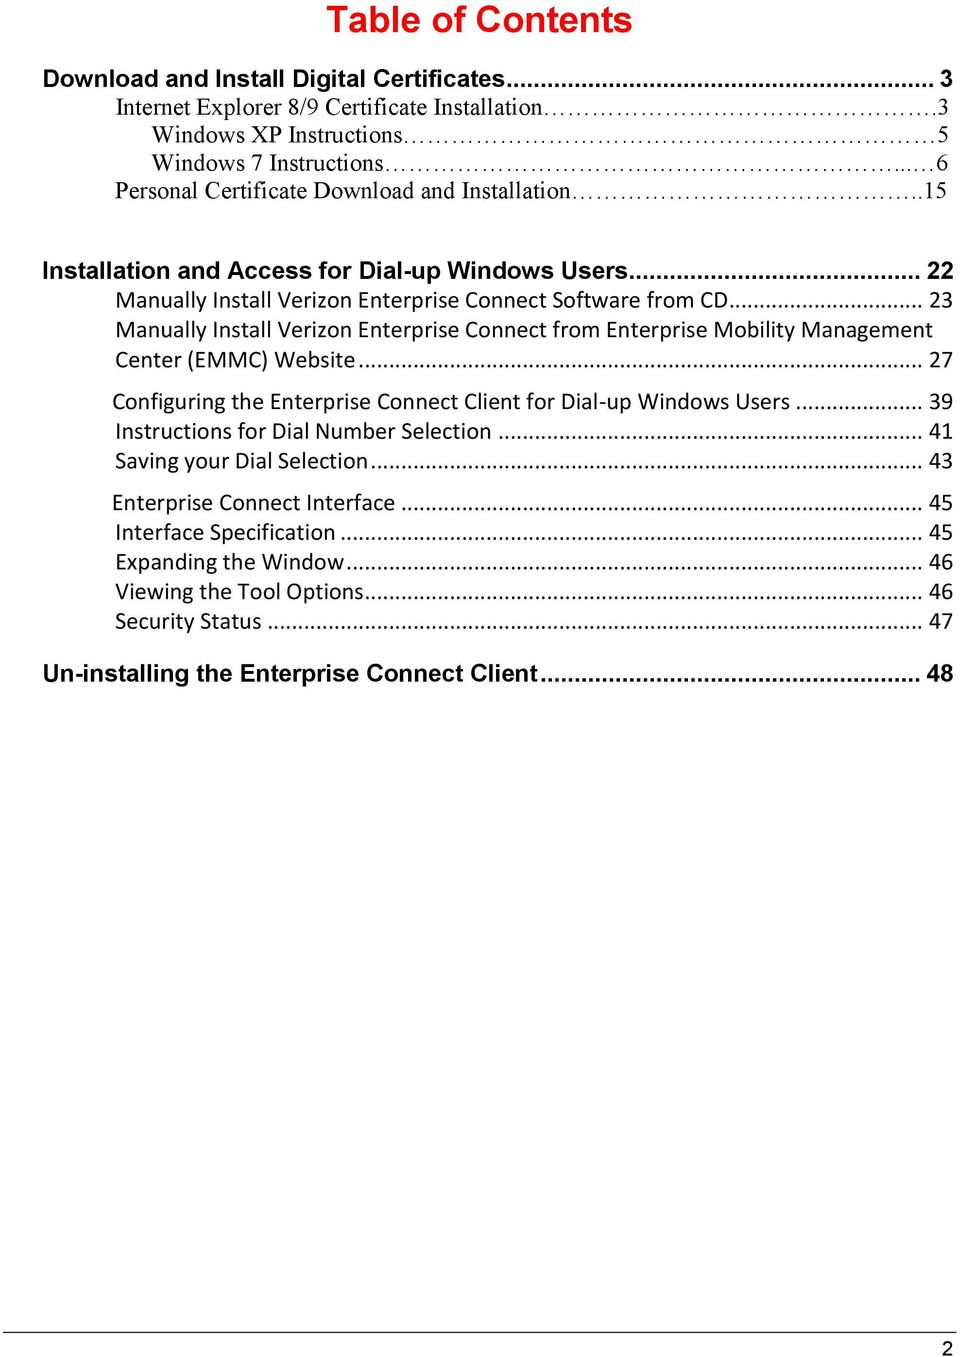 .. 23 Manually Install Verizon Enterprise Connect from Enterprise Mobility Management Center (EMMC) Website... 27 Configuring the Enterprise Connect Client for Dial-up Windows Users.